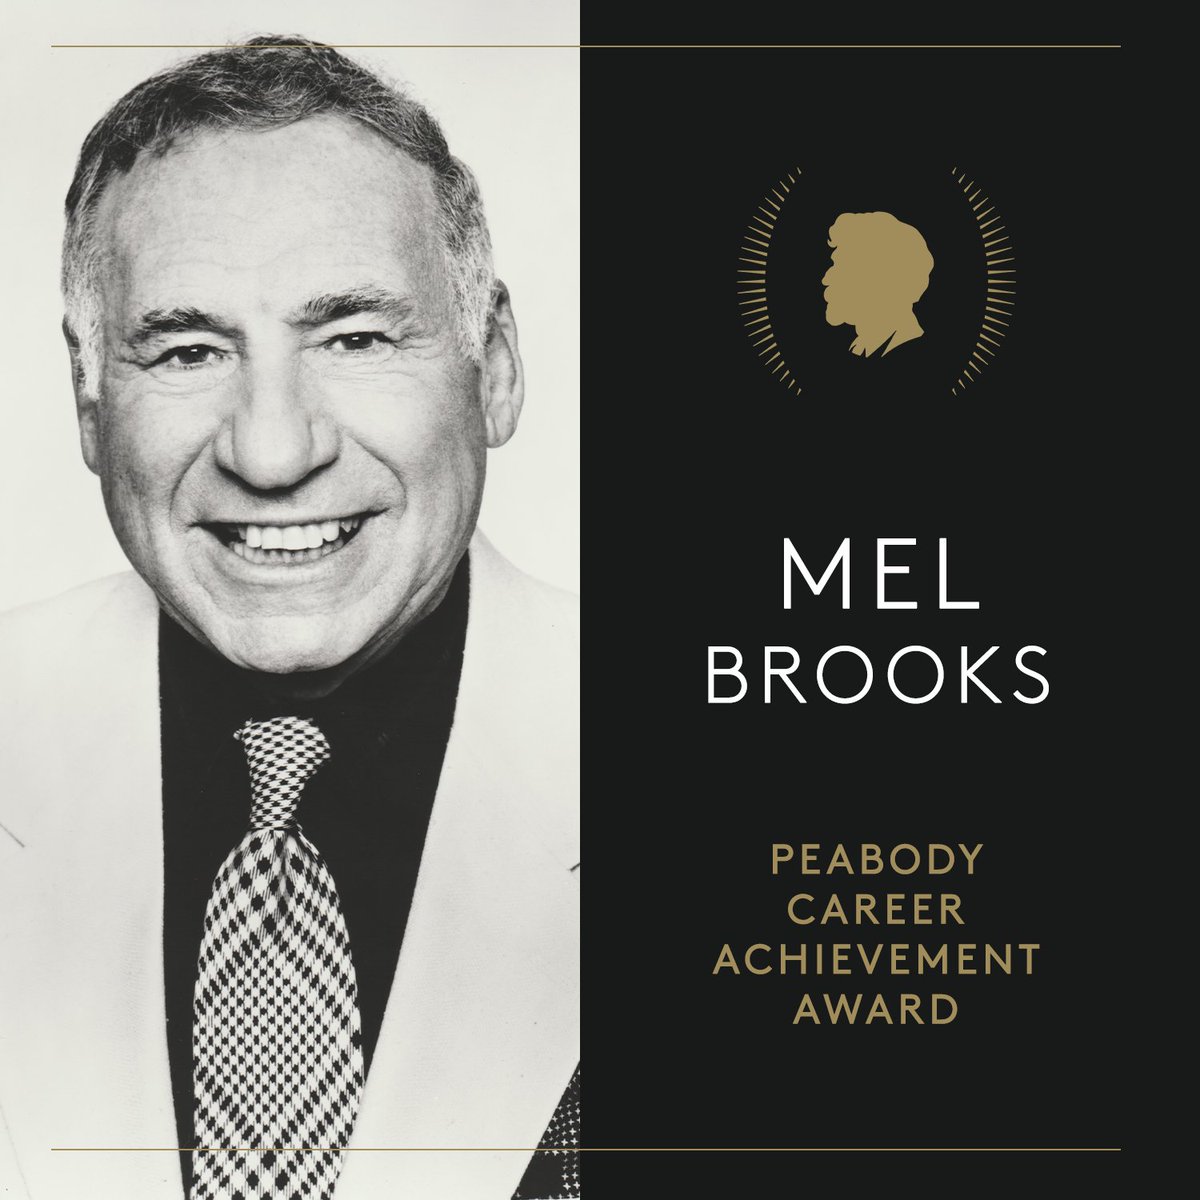 For his long life in shaping show business and American comedy, we are honored to recognize Mel Brooks with this year’s Peabody Career Achievement Award. ⭐️ peabodyawards.com/award-profile/… #PeabodyAwards #PeabodyWinner